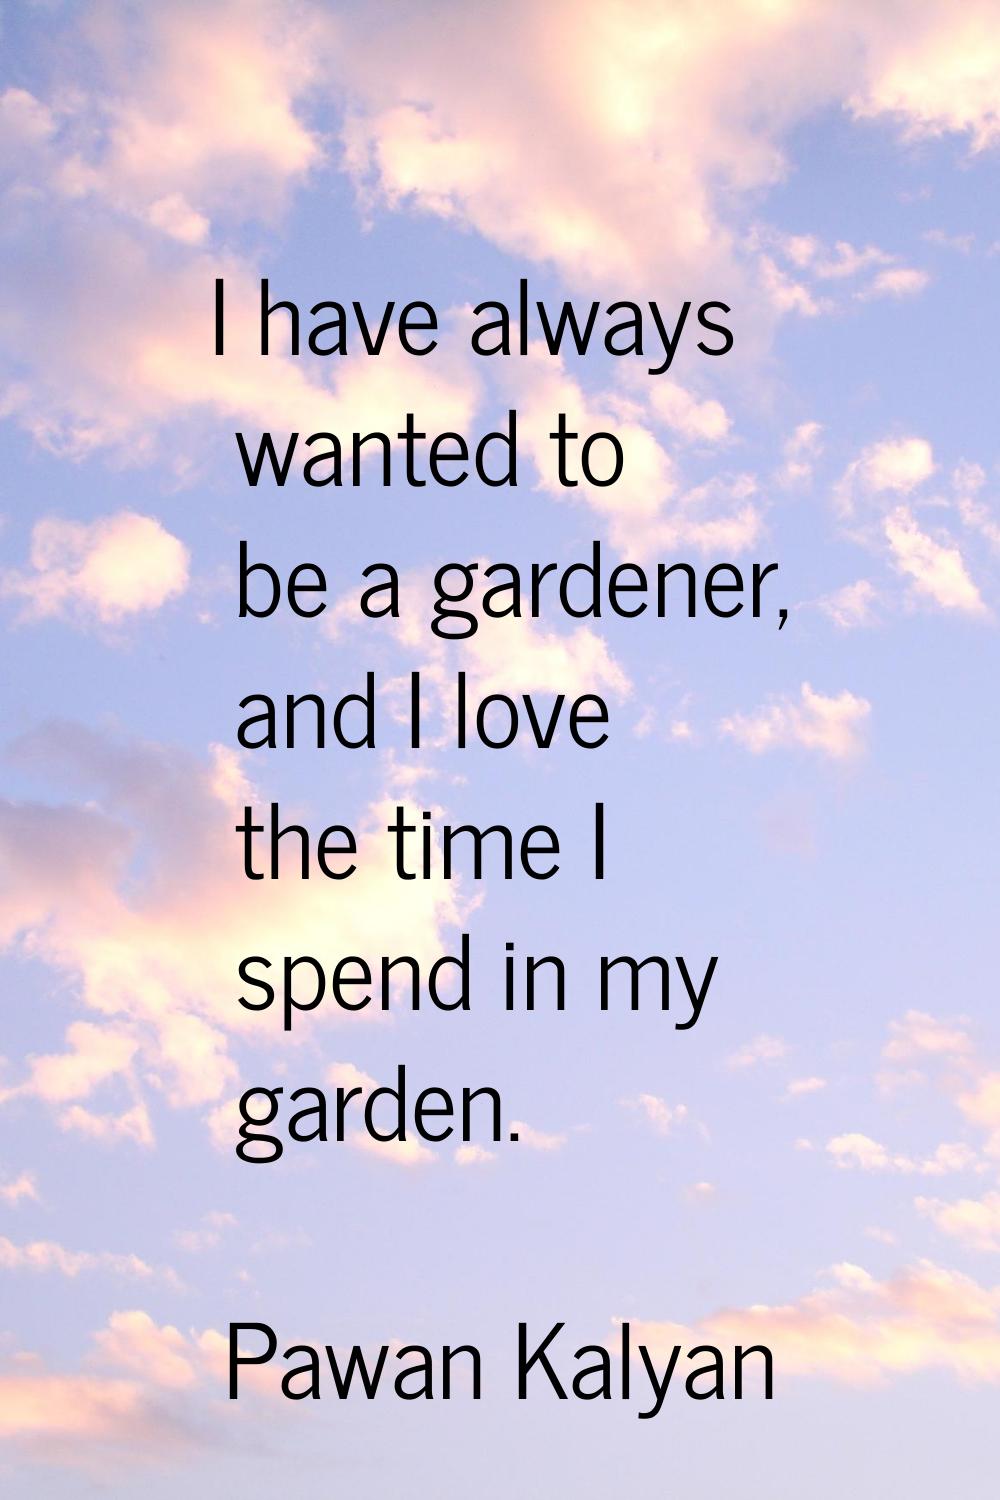 I have always wanted to be a gardener, and I love the time I spend in my garden.